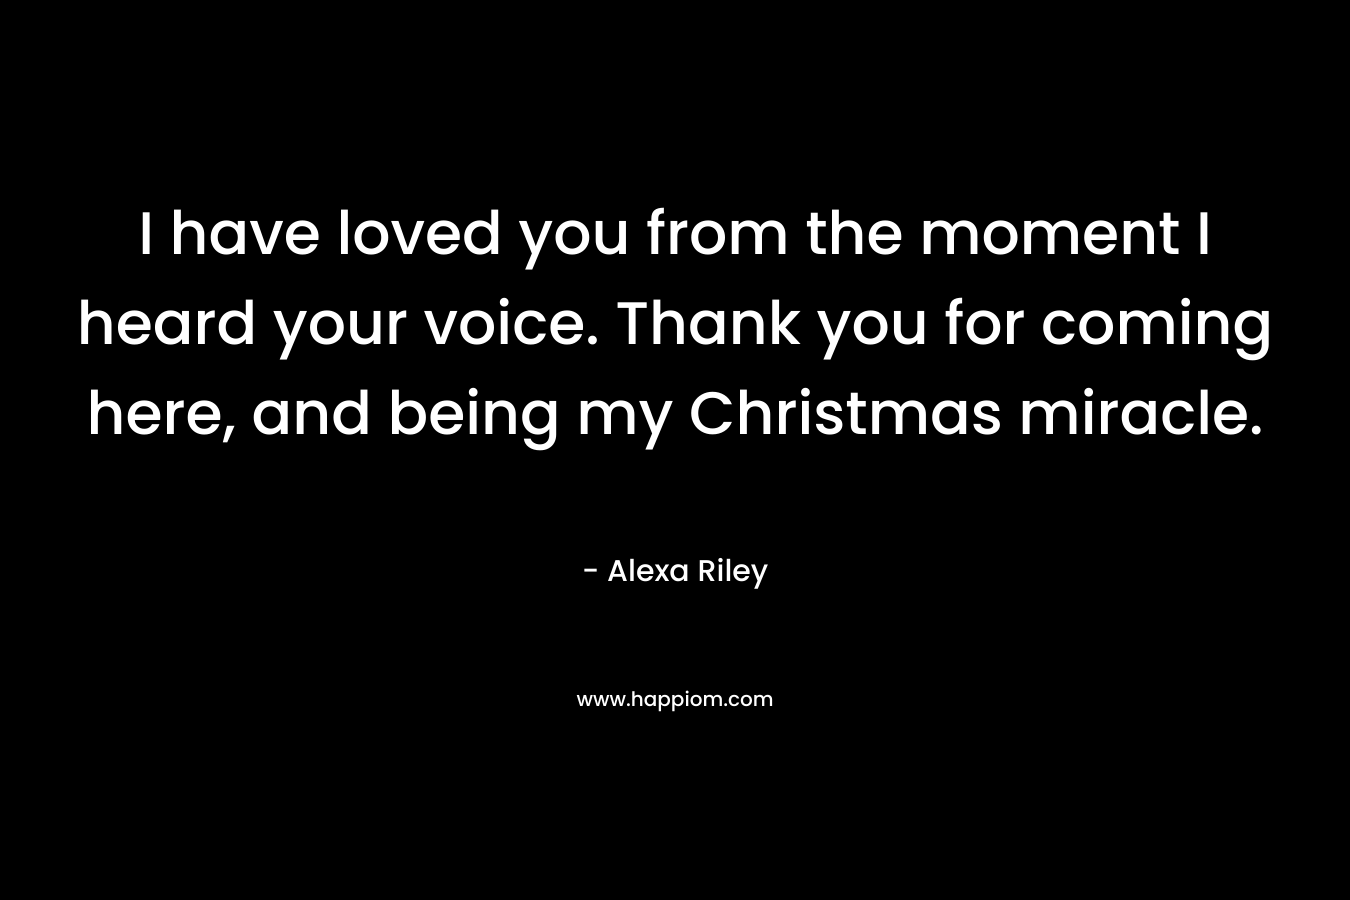 I have loved you from the moment I heard your voice. Thank you for coming here, and being my Christmas miracle. – Alexa Riley